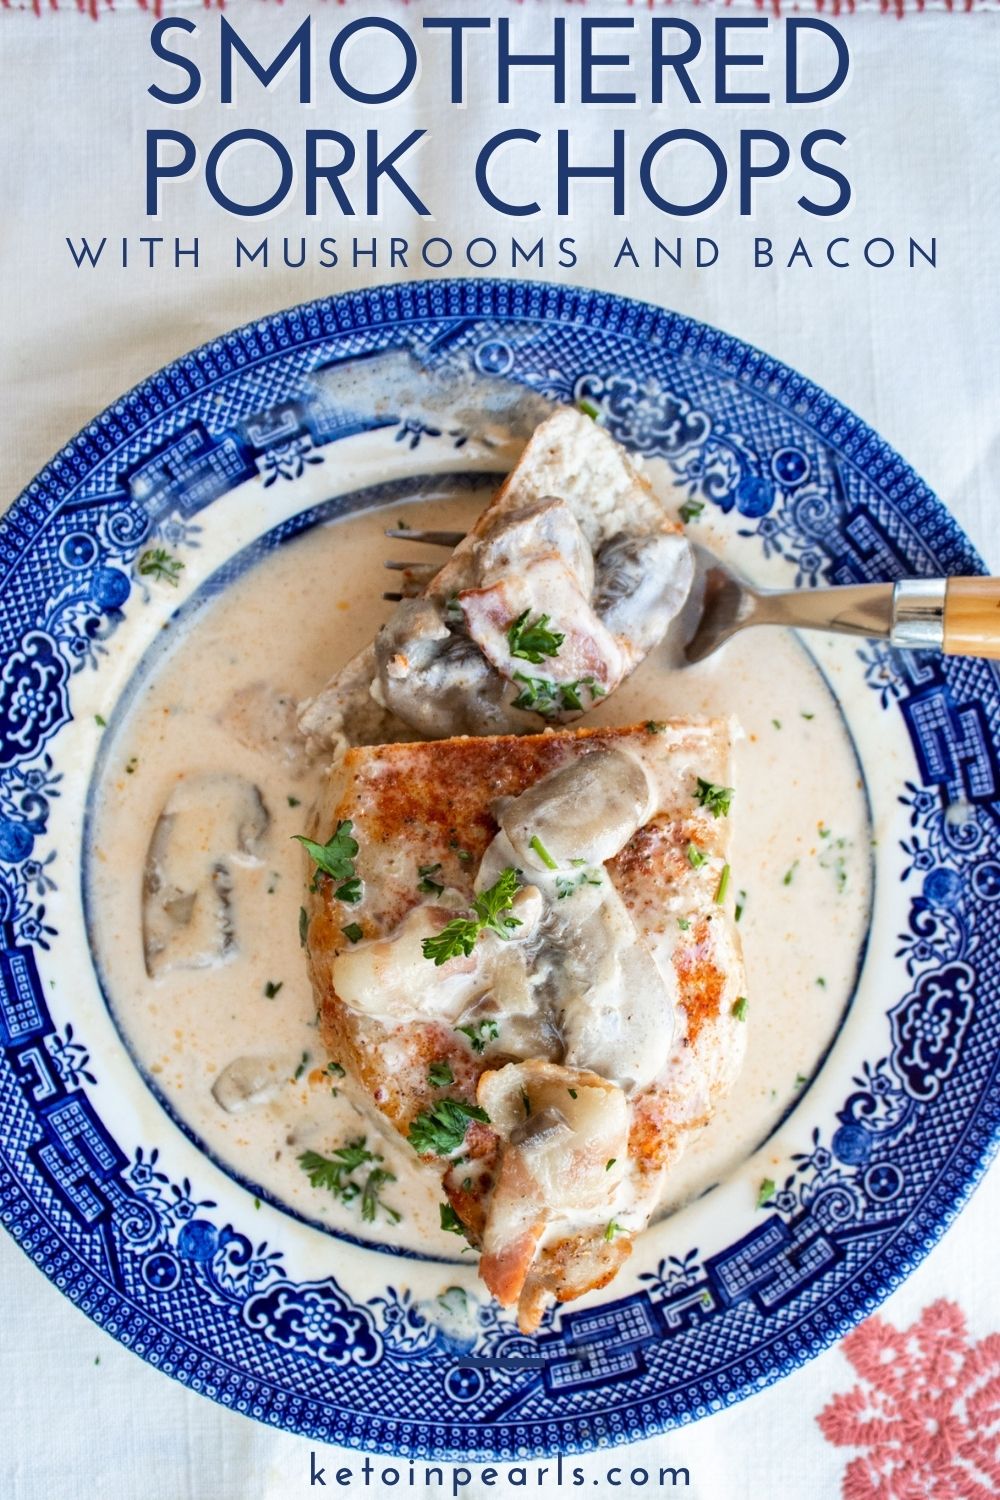 Thick cut boneless pork chops are seasoned and baked in the oven before getting smothered in a bacon and mushroom cream sauce.